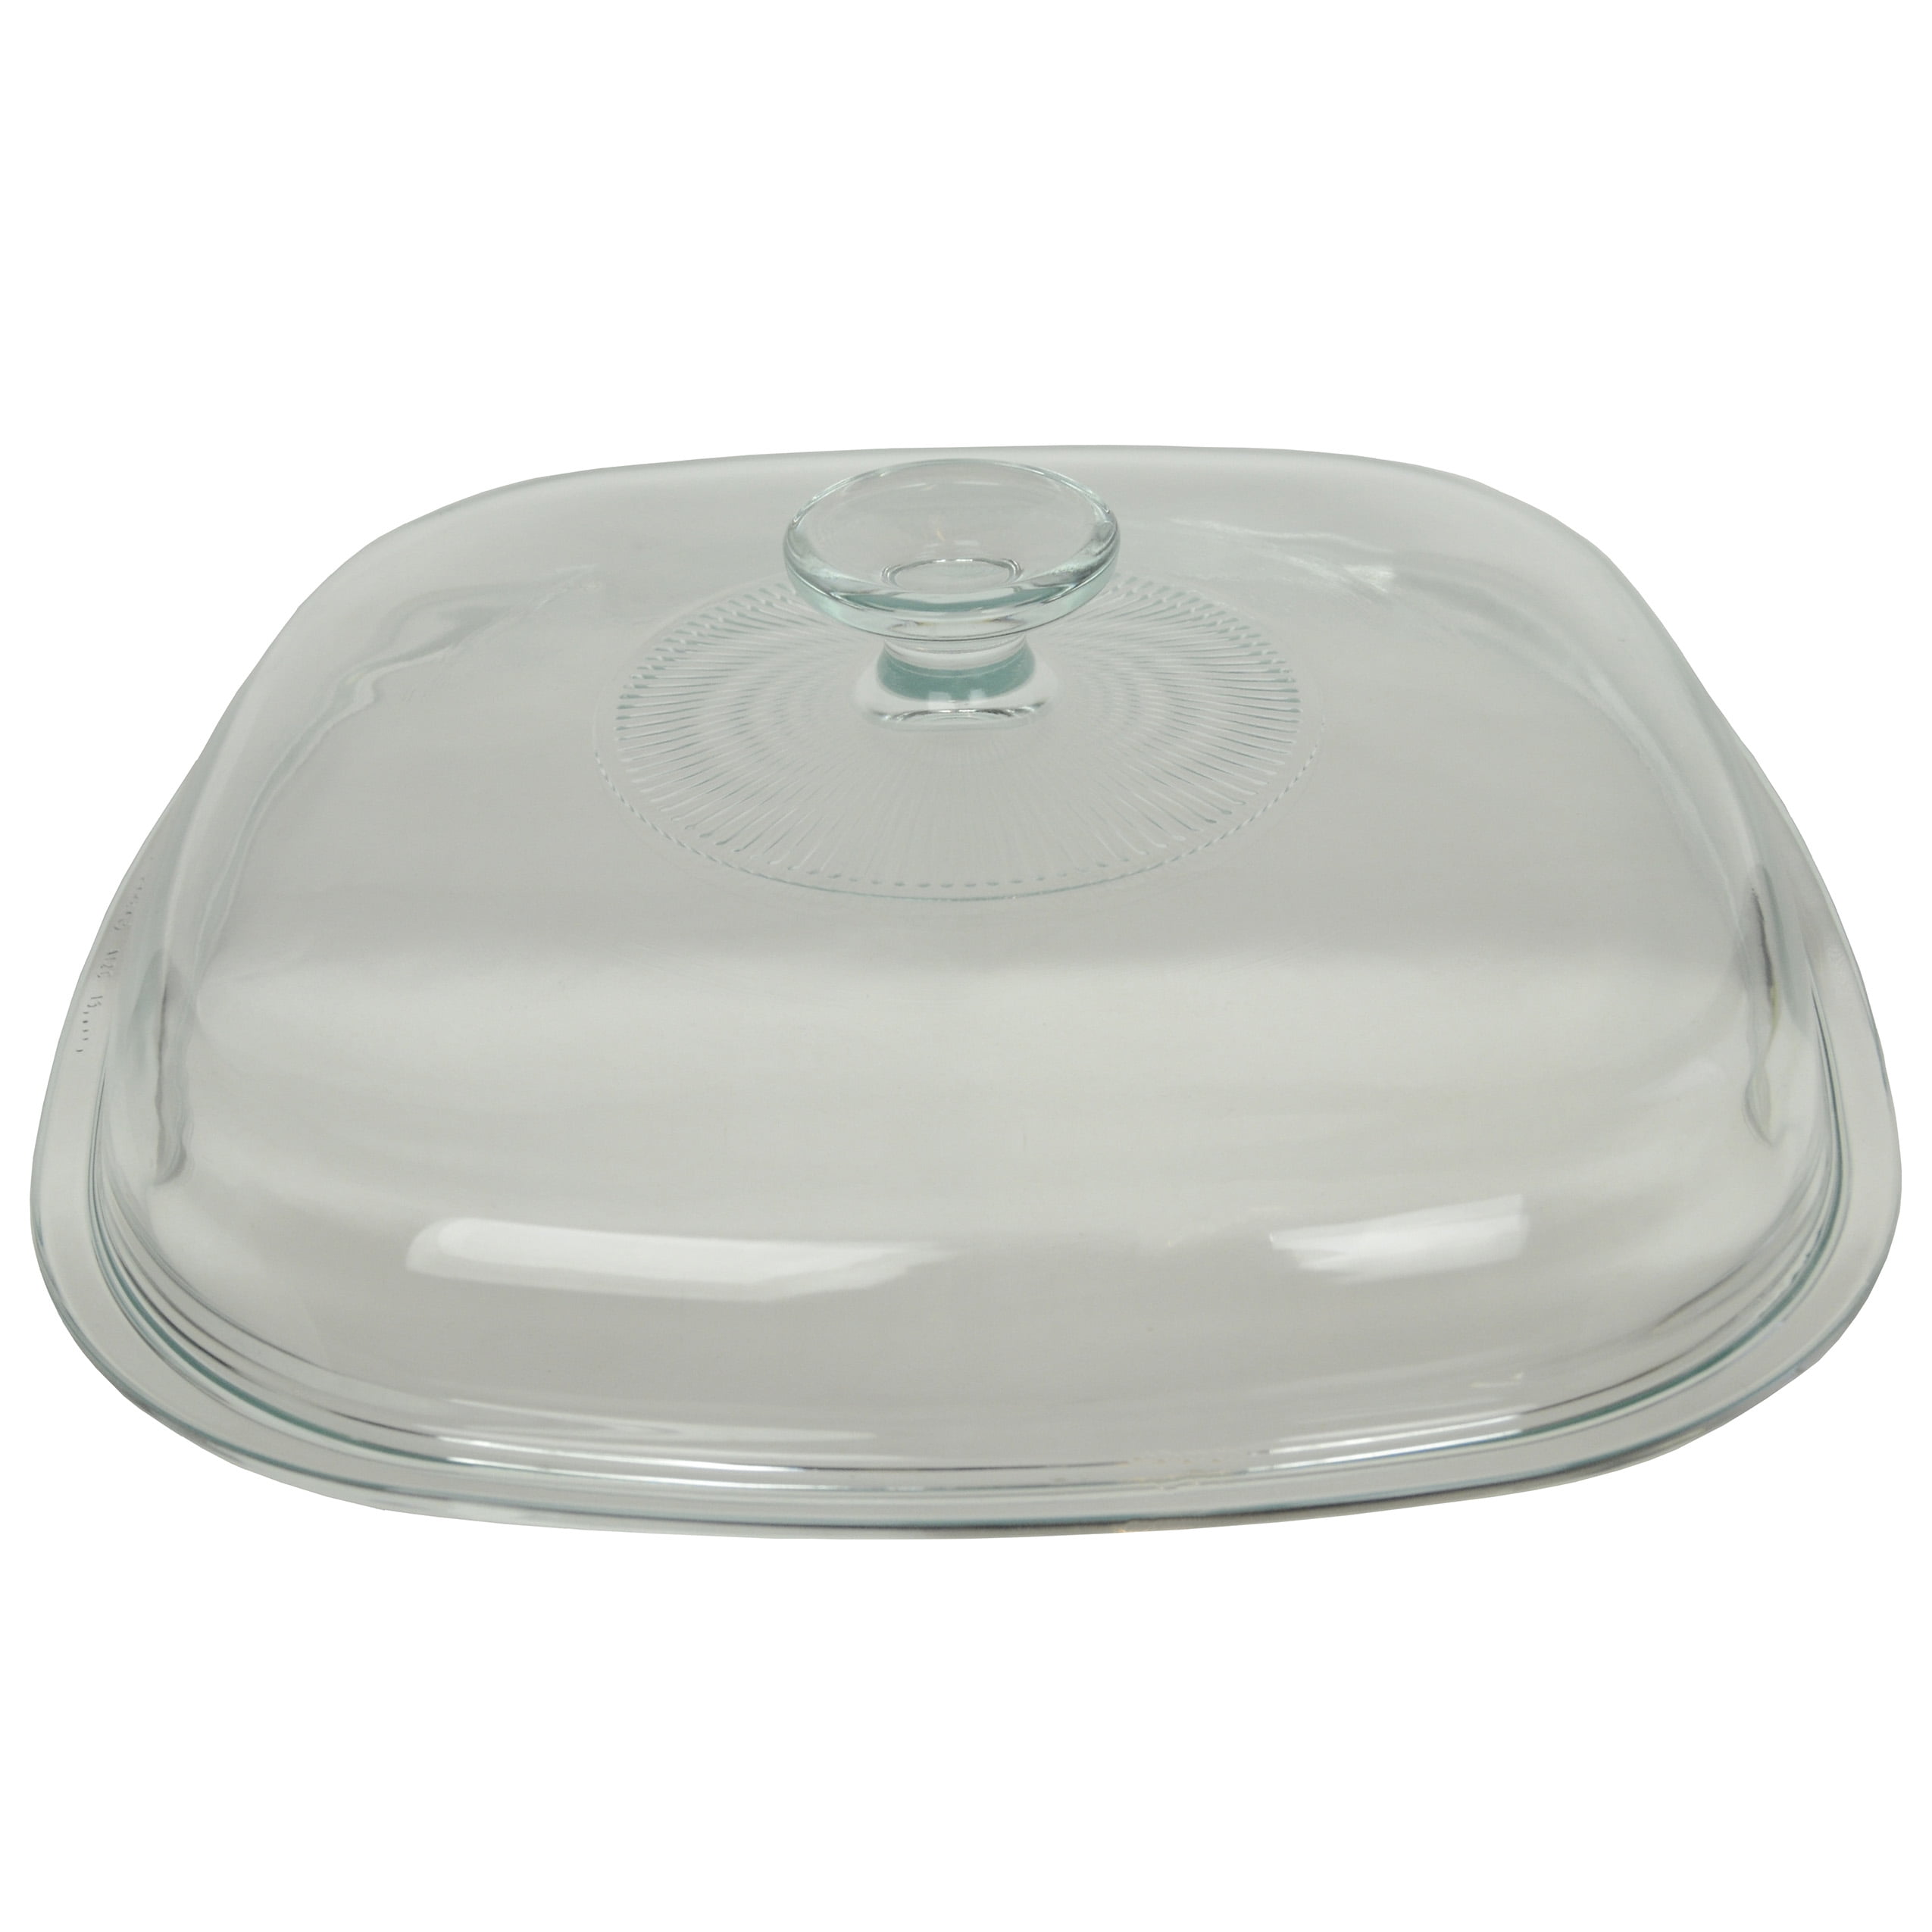 A-4-B &  A-5-B Casseroles A-12-PC Corning Ware Plastic Lid Cover  For A-10-B 